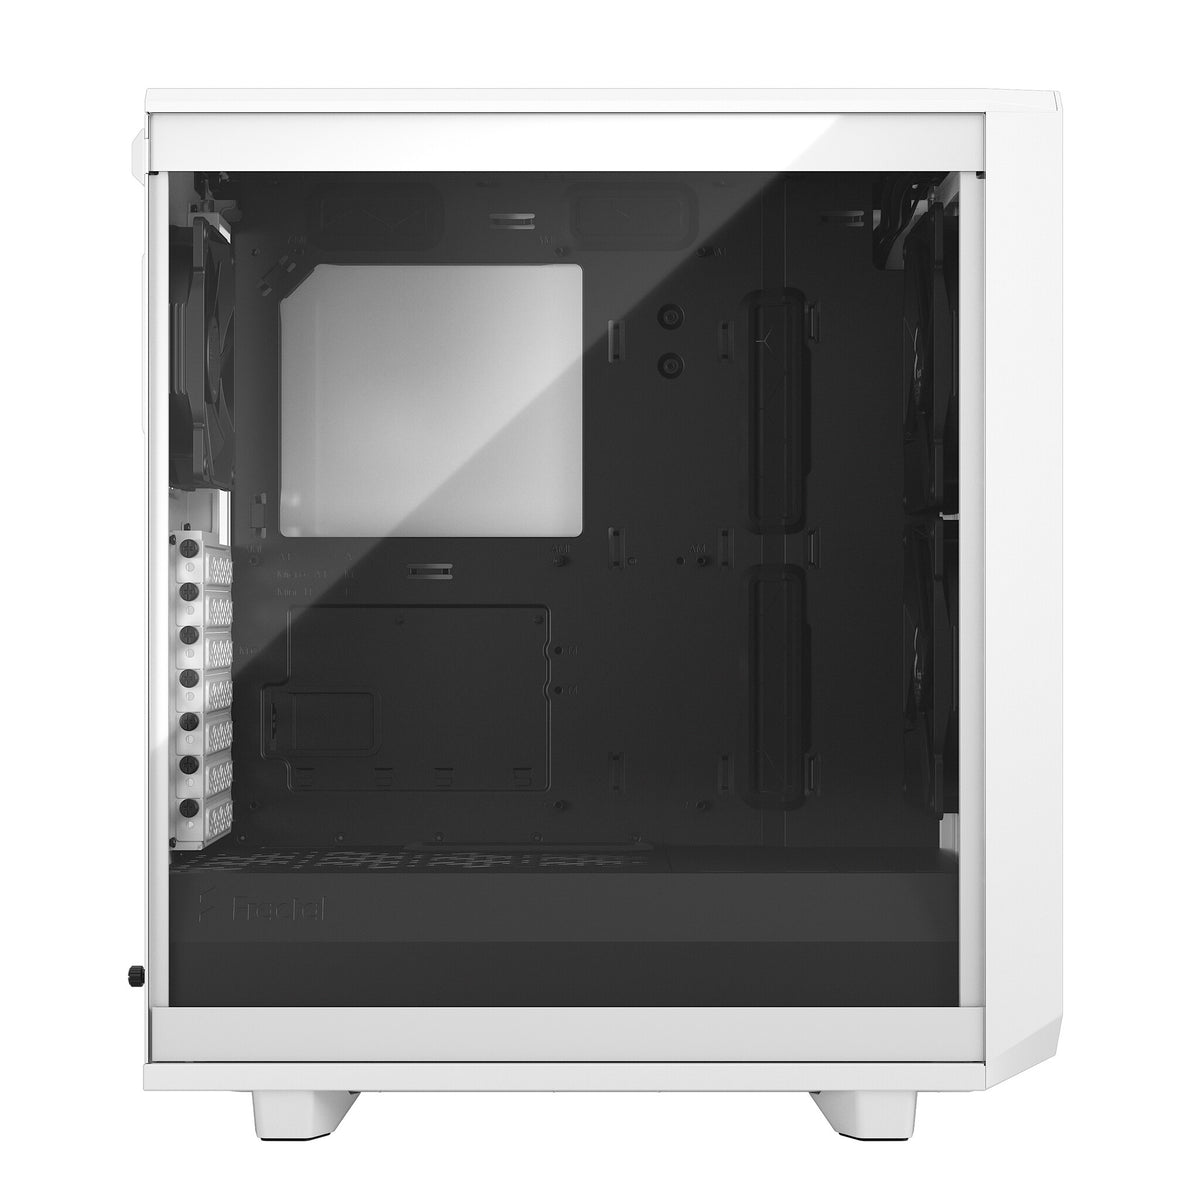 Fractal Design Meshify 2 Compact - ATX Mid Tower Case in White / TG Clear Tint